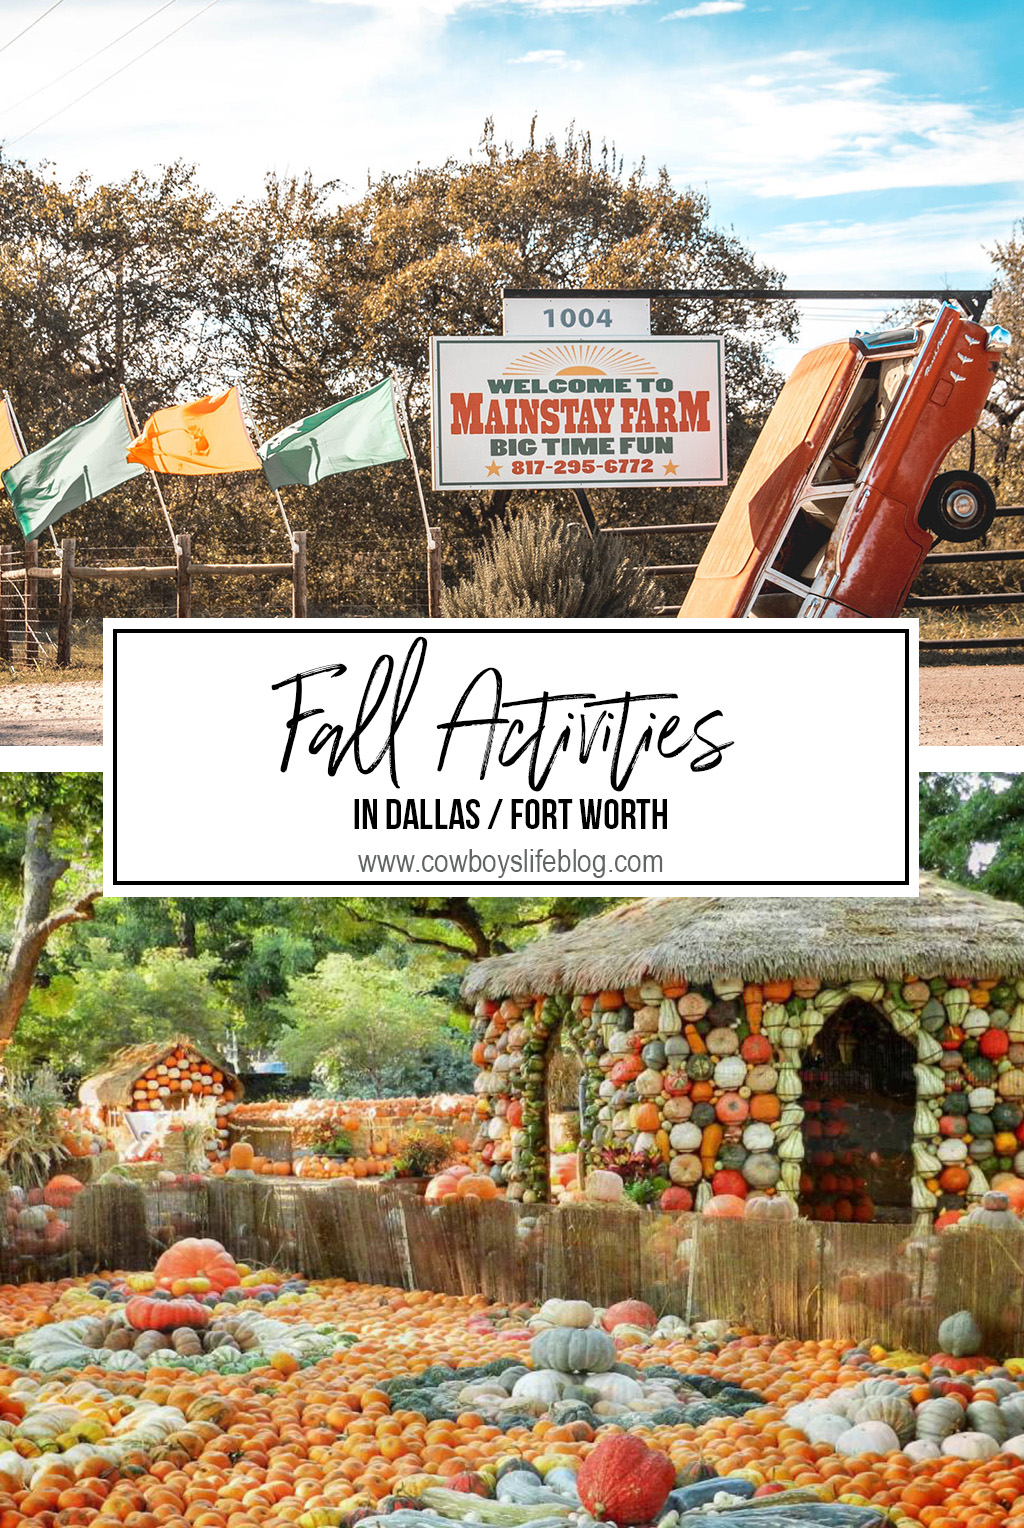 Fall activities in Dallas / Fort Worth